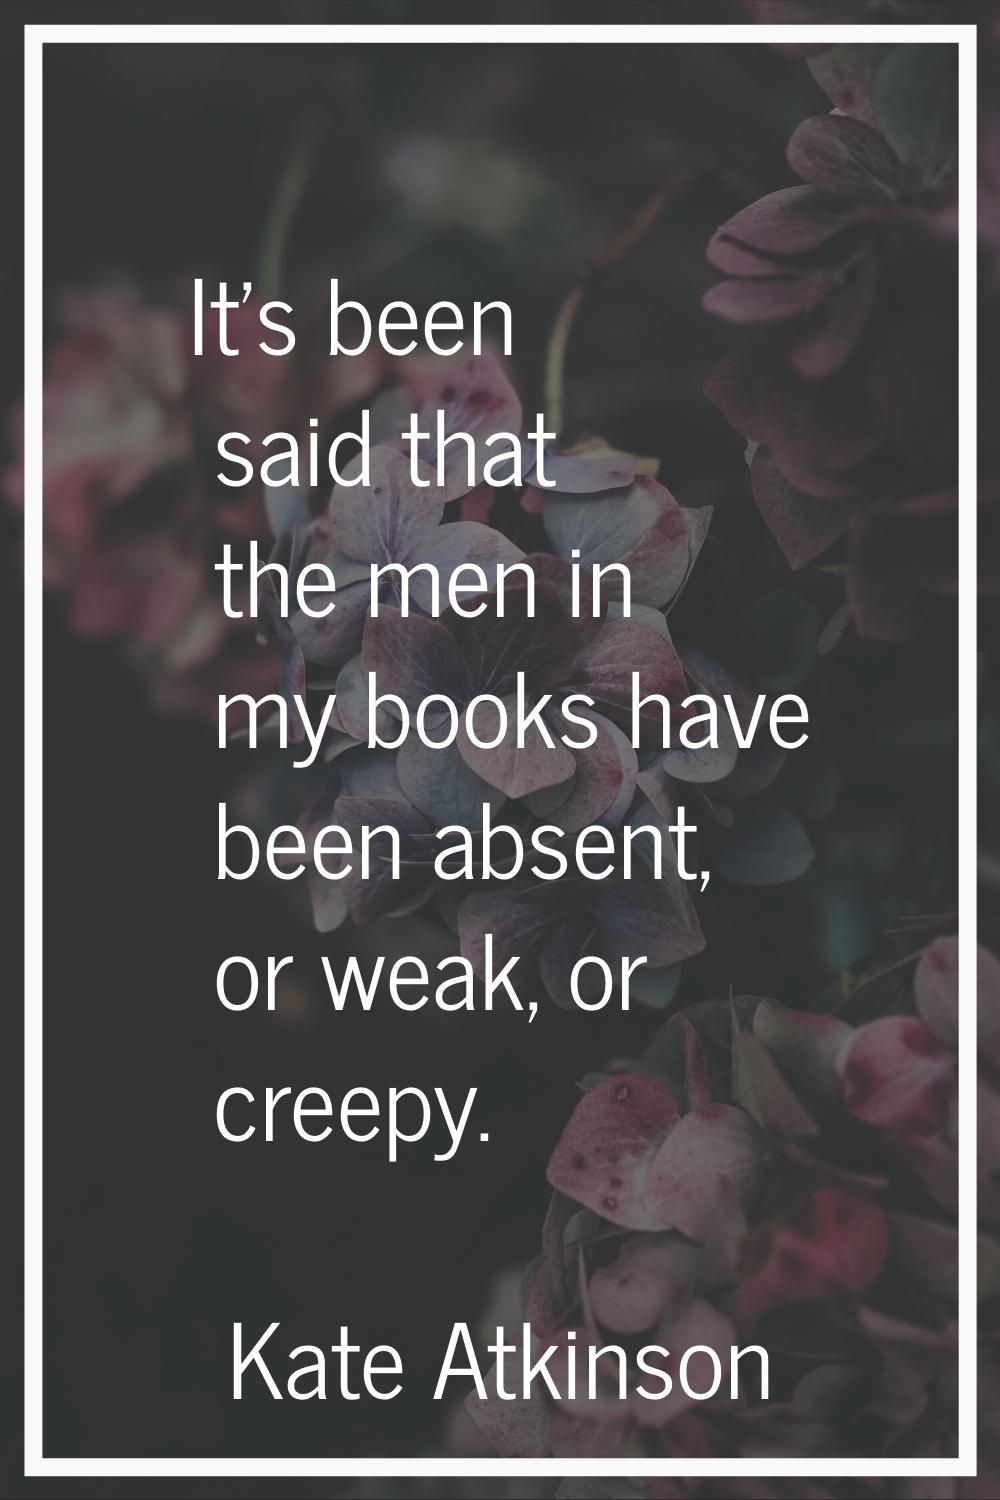 It's been said that the men in my books have been absent, or weak, or creepy.